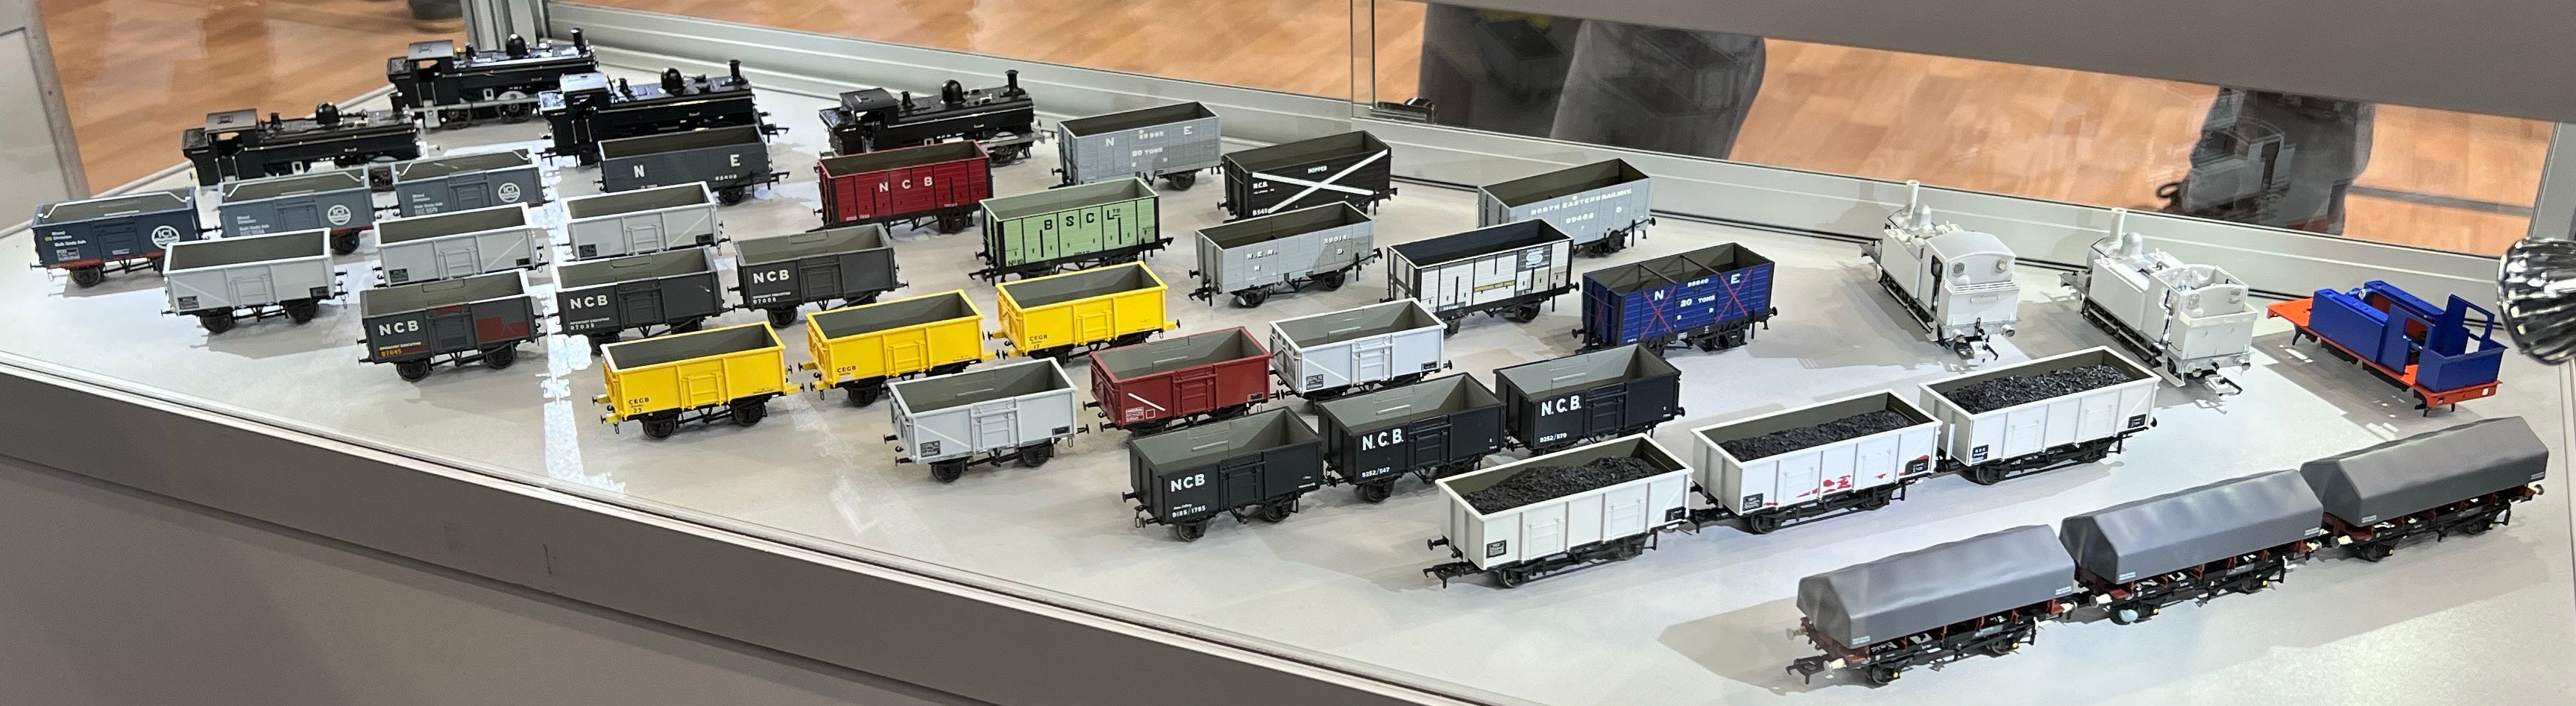 Accurascale Open Wagons Display